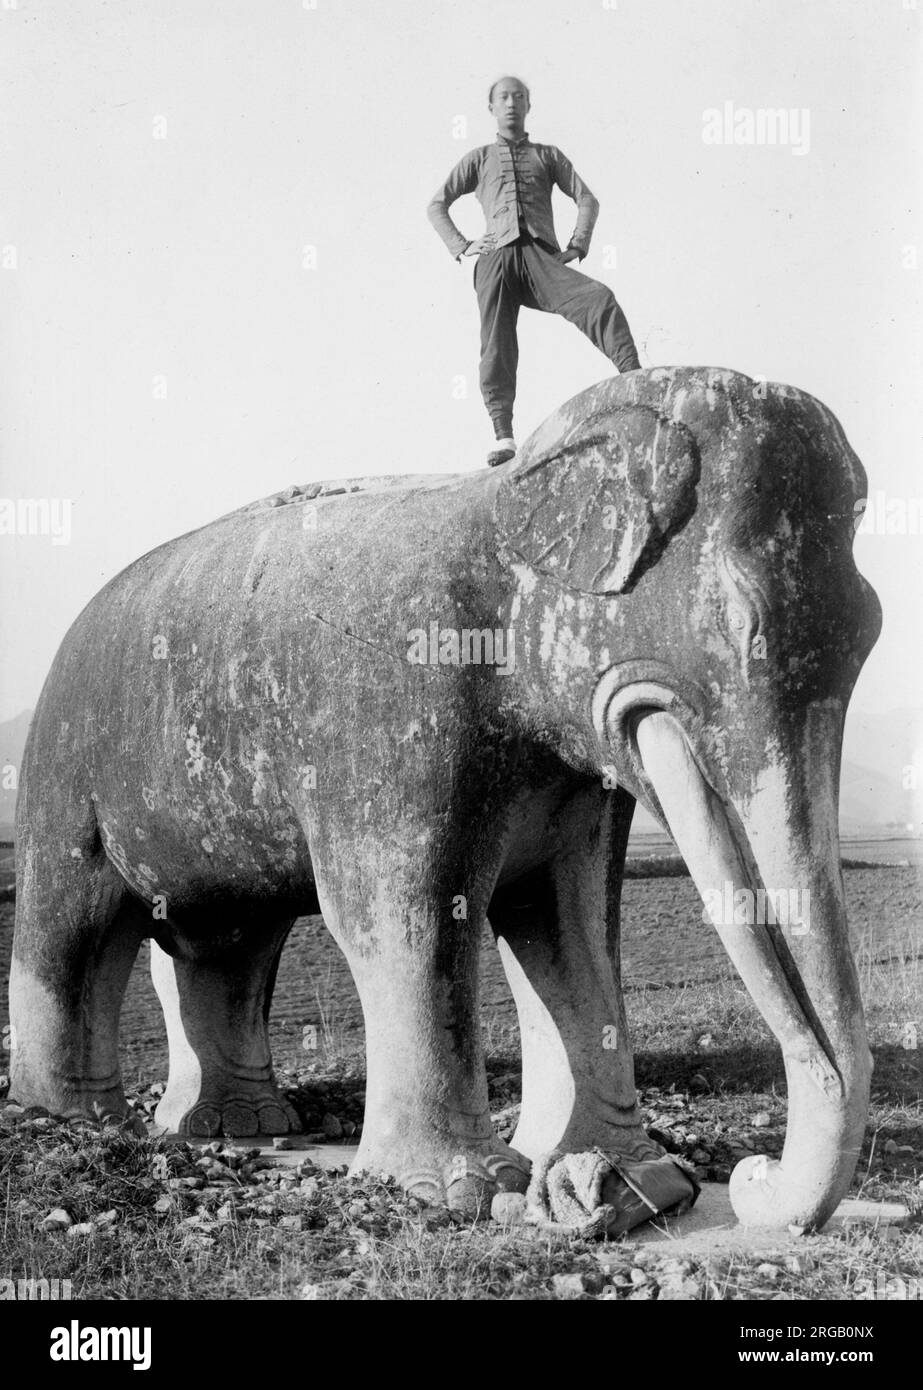 Man on top of stone elephant, imperial Ming tombs, China, c.1910 Stock Photo